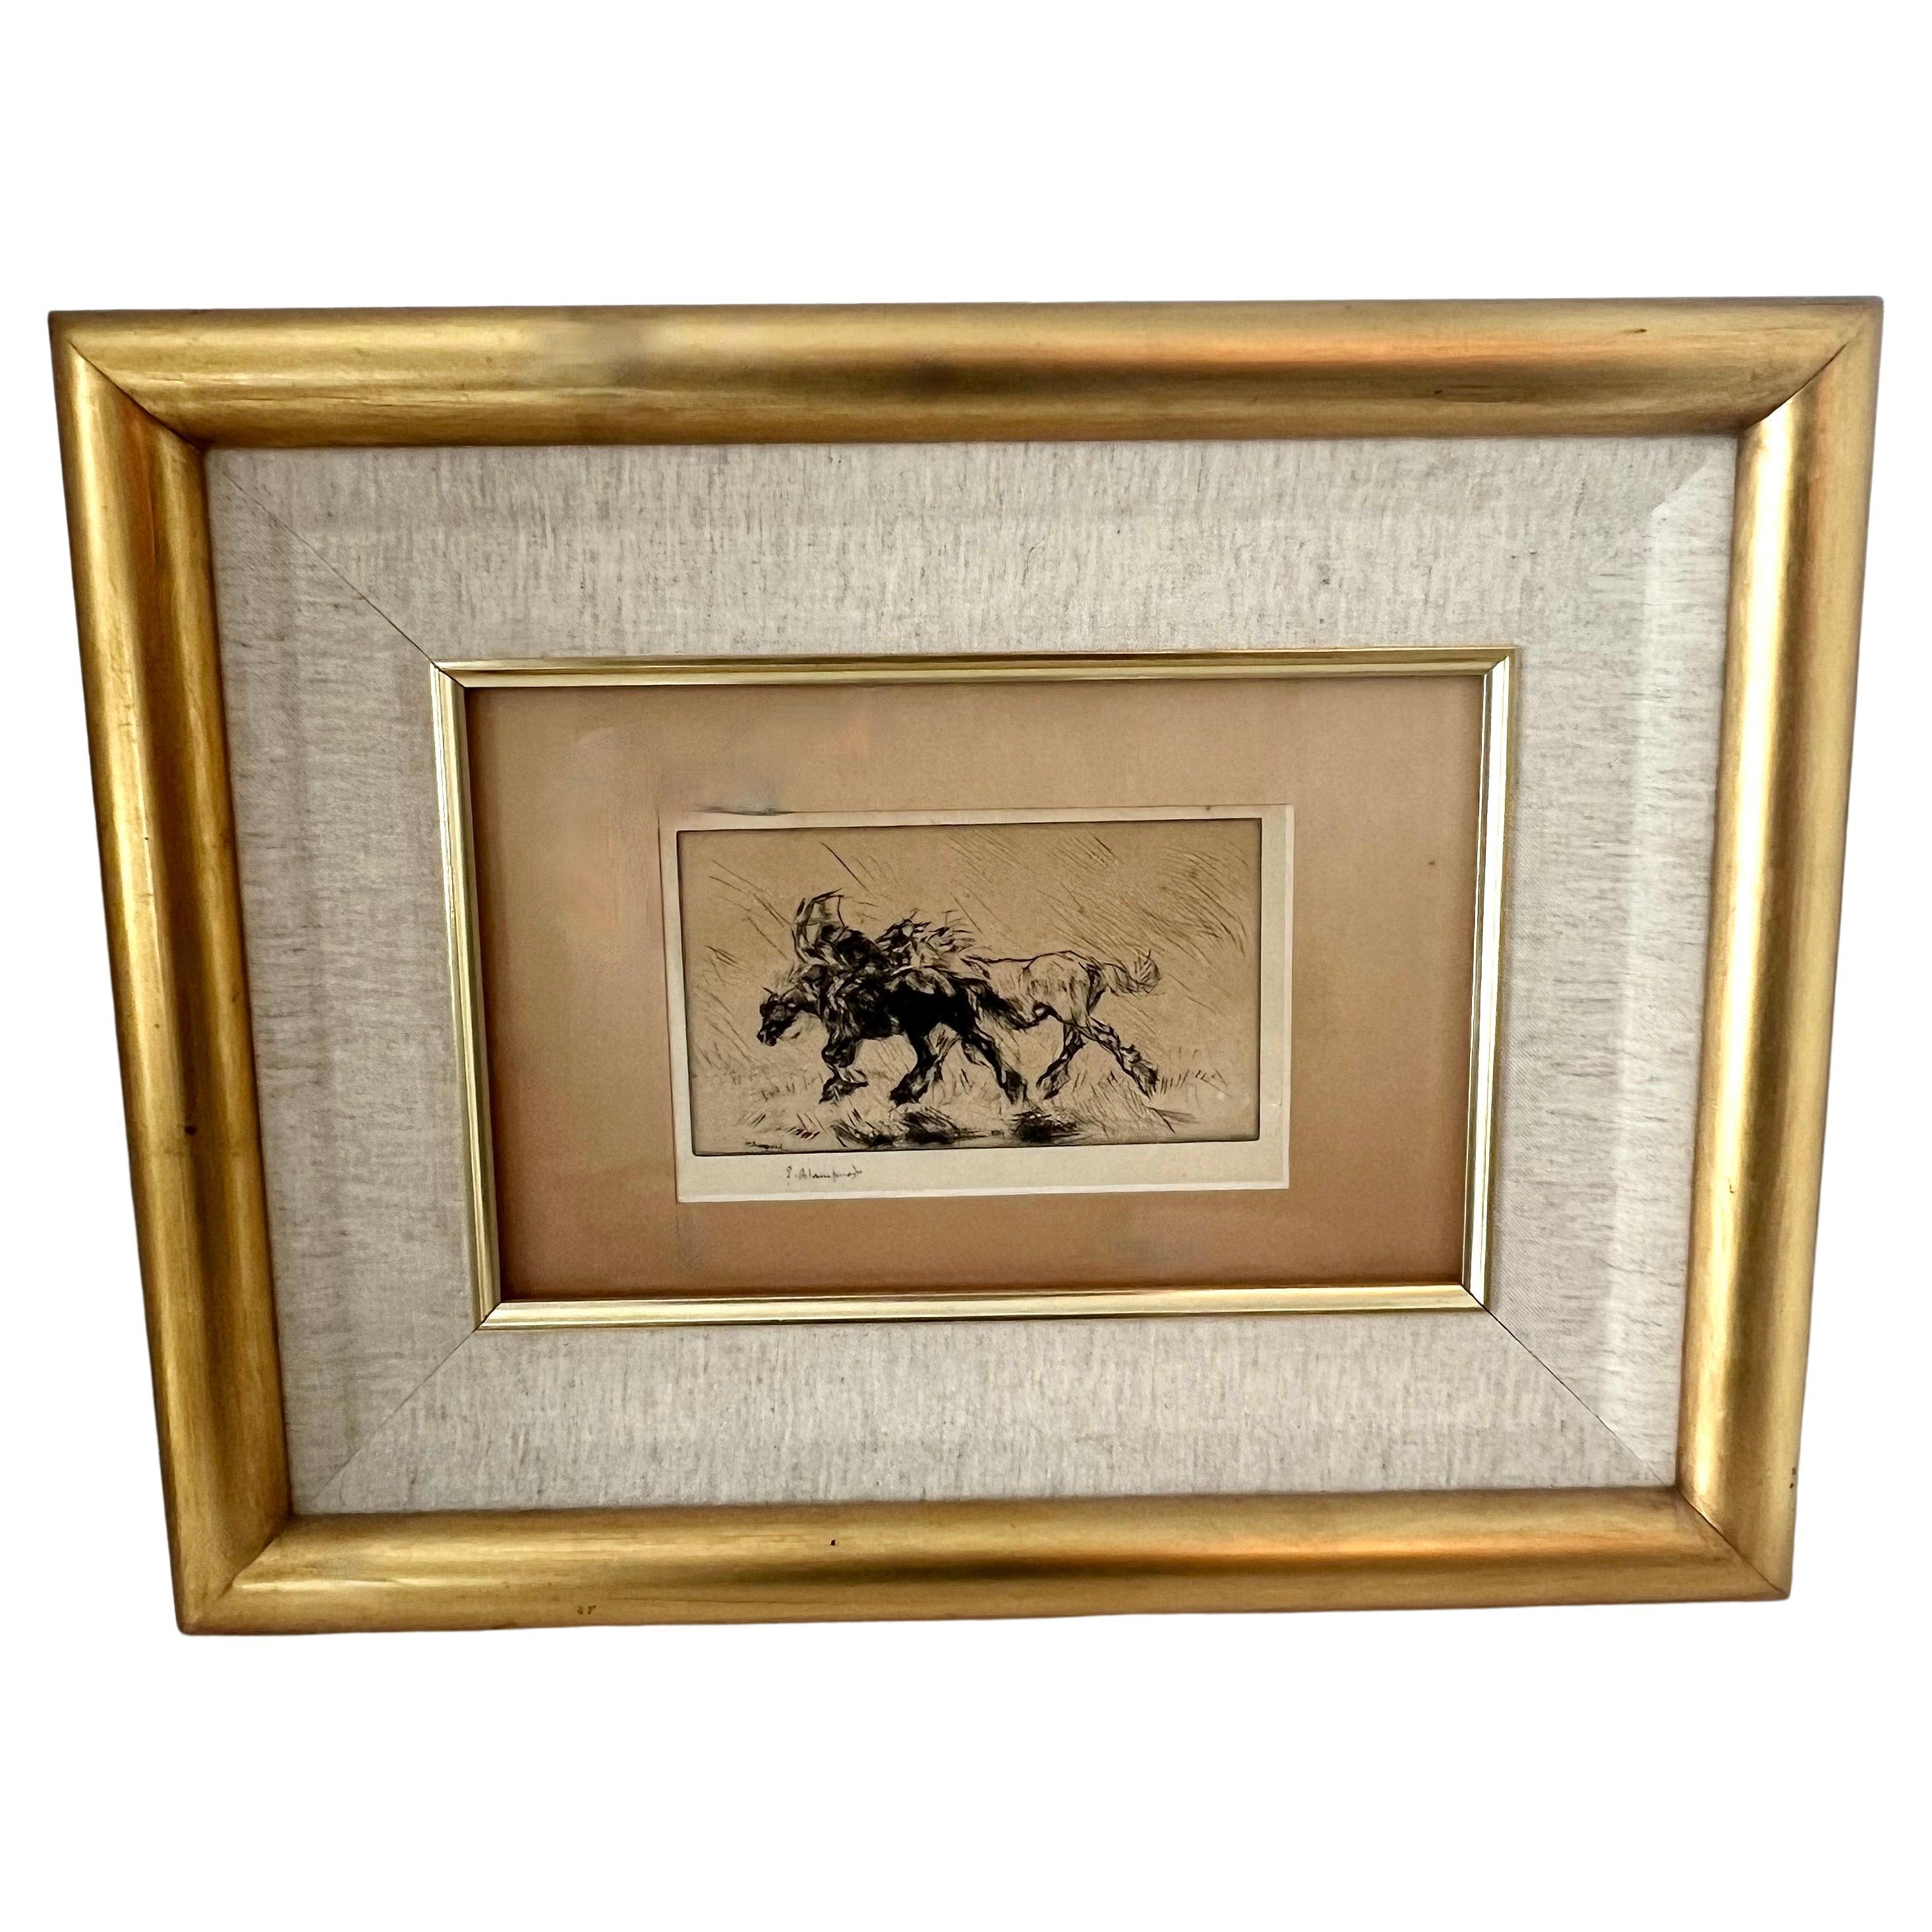 A wonderful pen on paper drawing or etching of horses - the fluidity and bold attention to details in the bodies are exquisite. 

The piece has been matted and framed in a gilt frame - ready for a special room with a story to tell.  

E. Blampied is